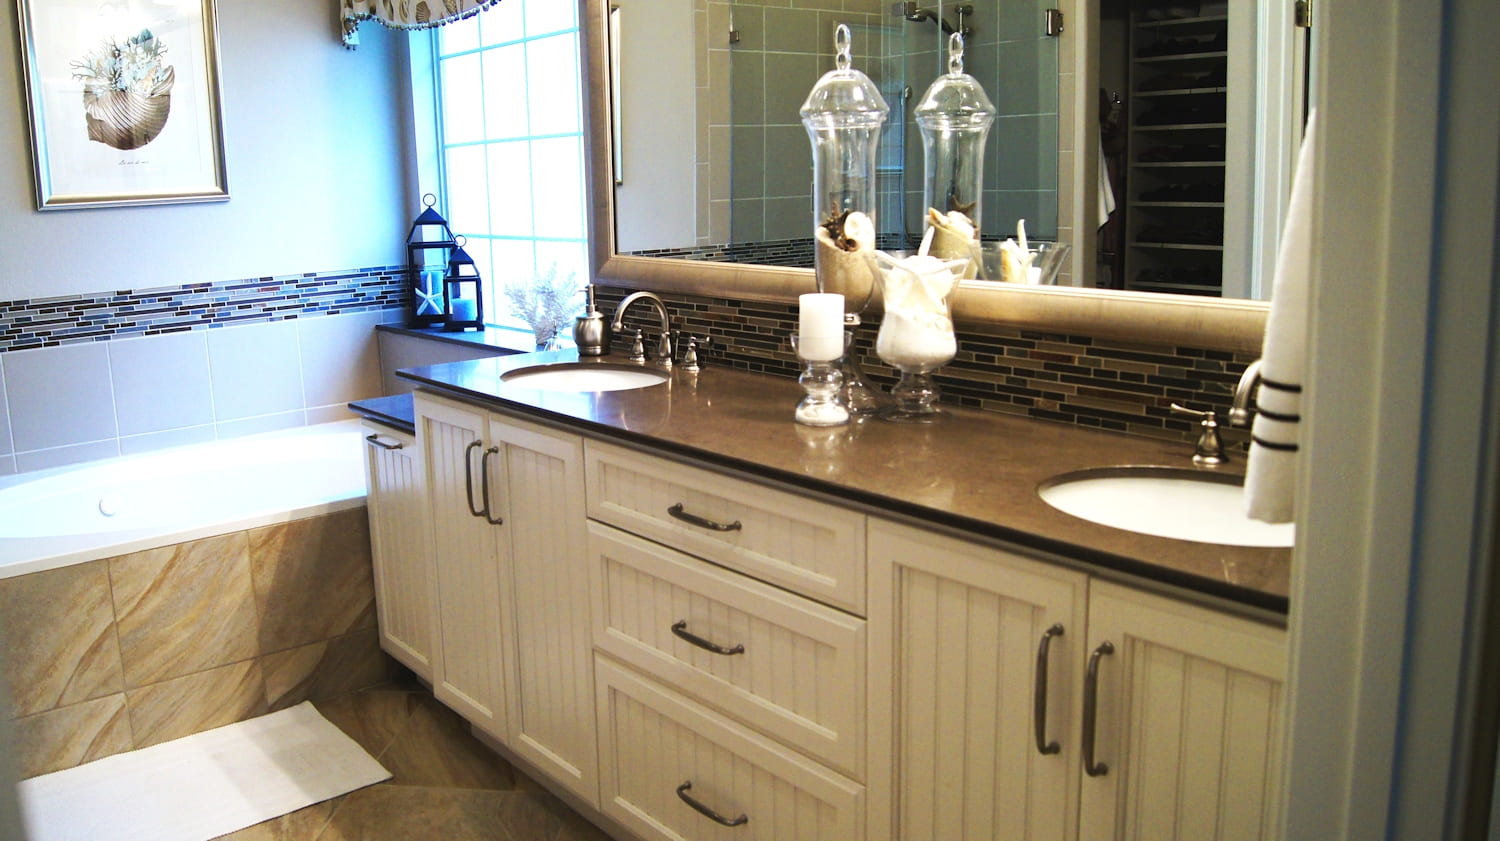 The Best Barton Creek, TX Bathroom Remodel | Kitchens by Bell